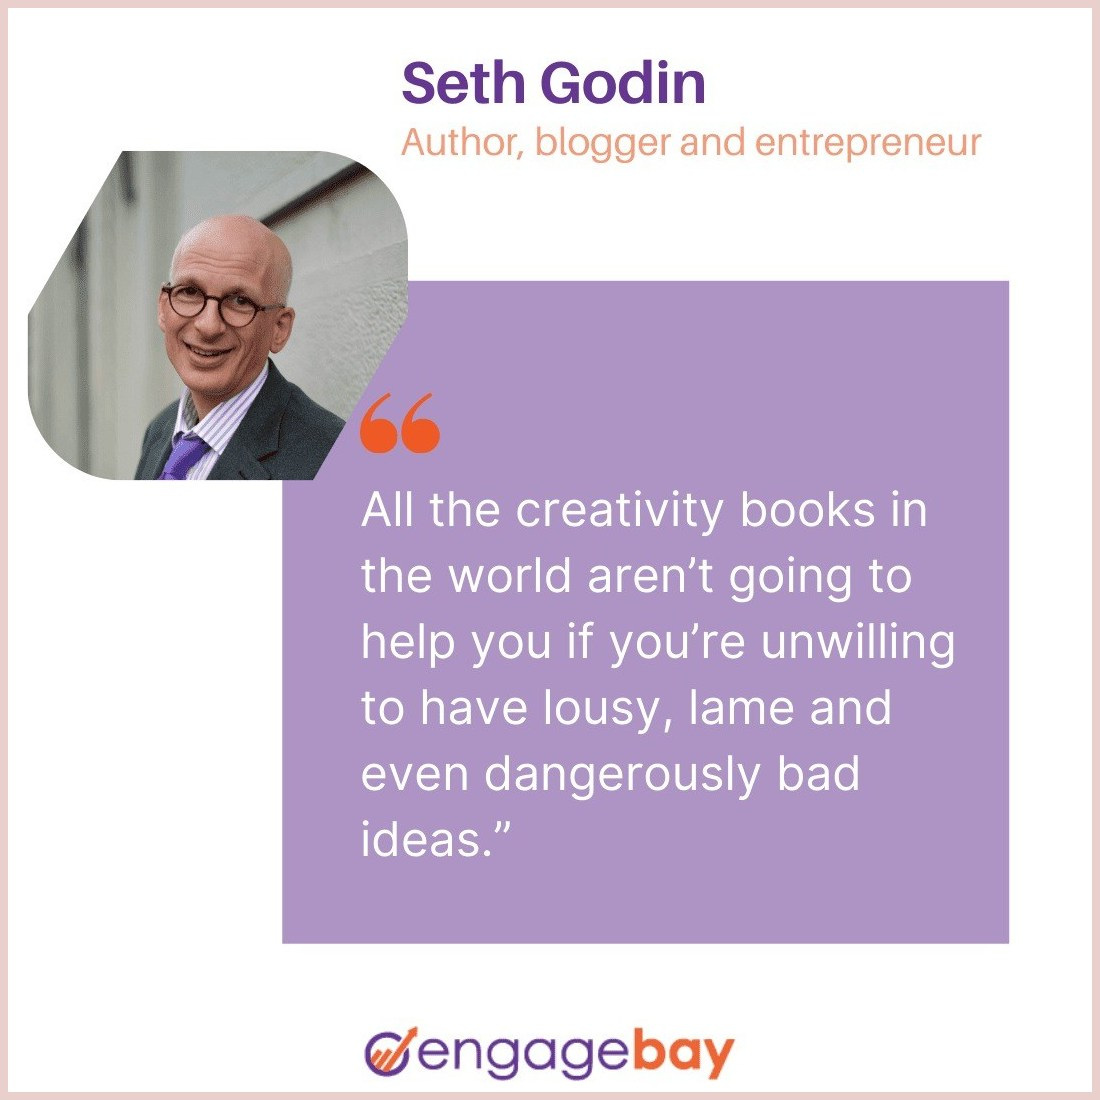 content marketing quote by Seth Godin